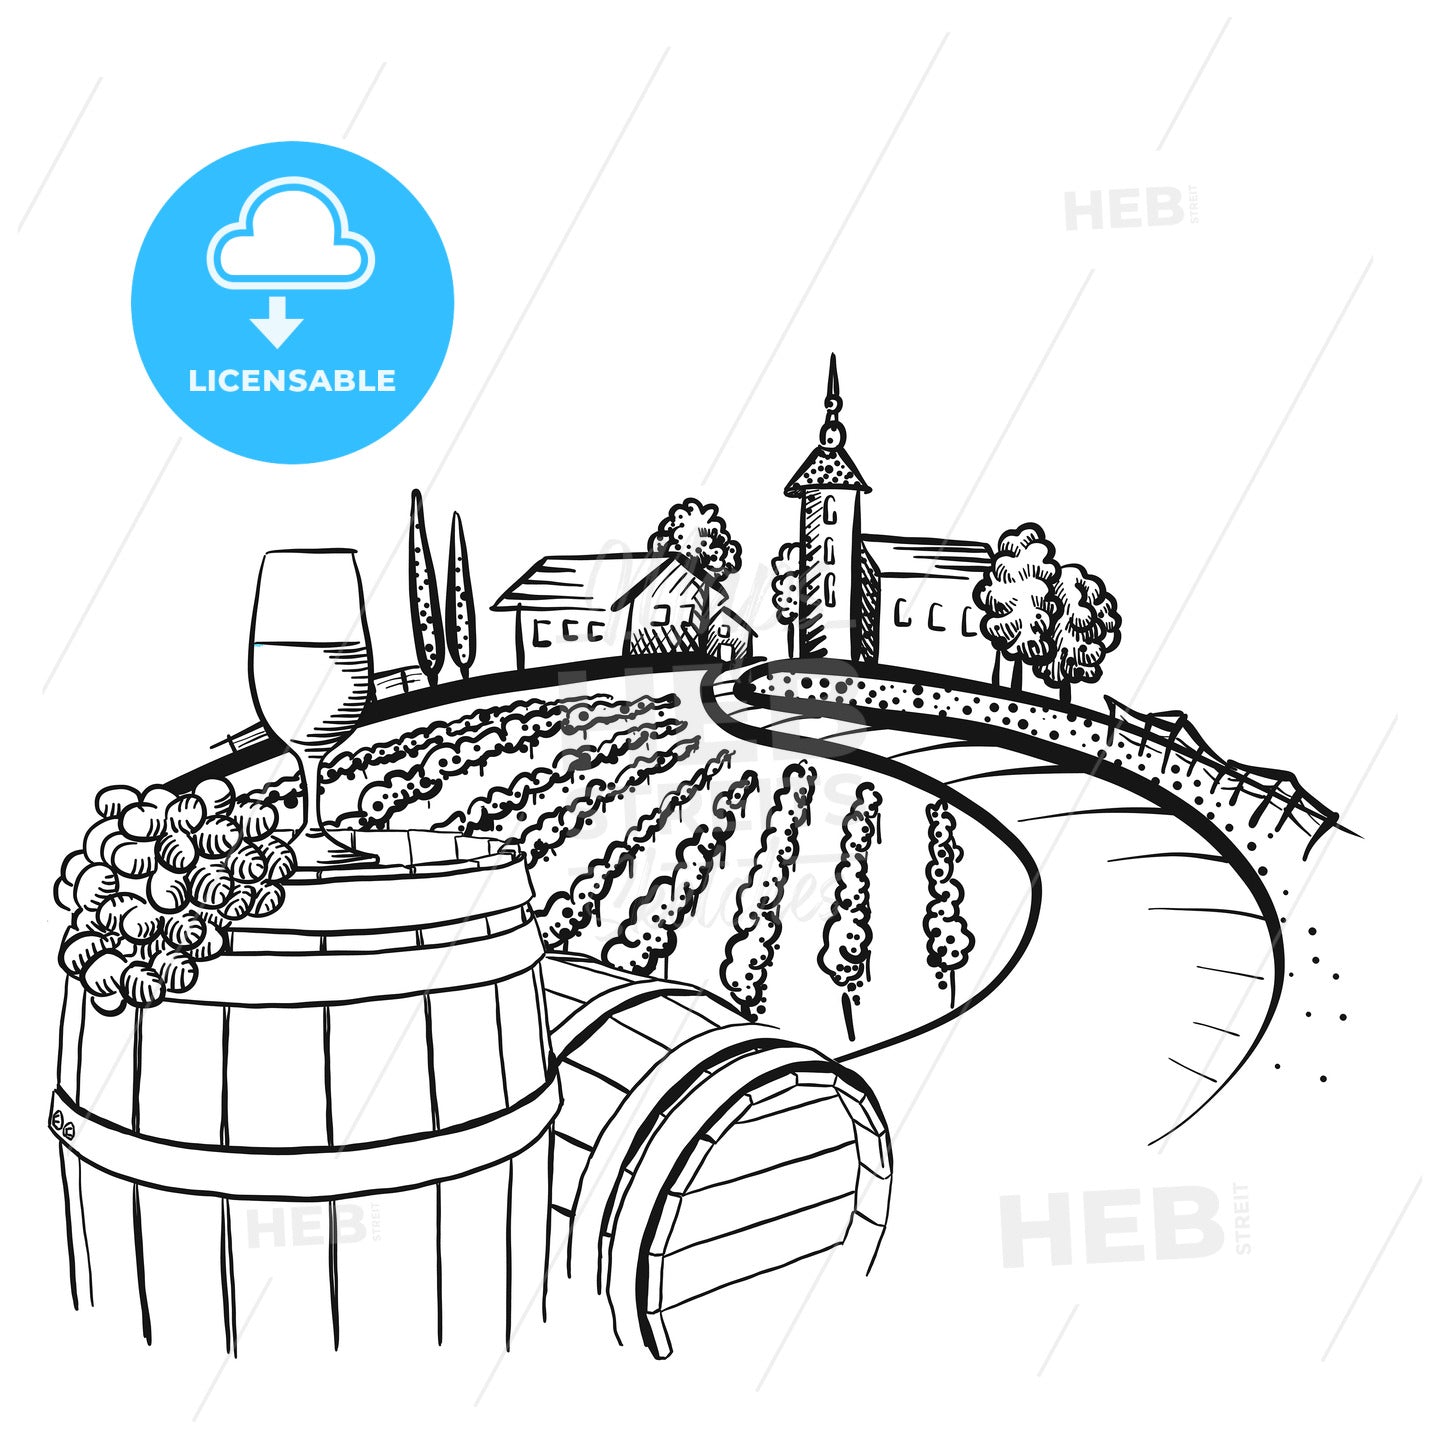 Vineyard barrel and glass drawing – instant download